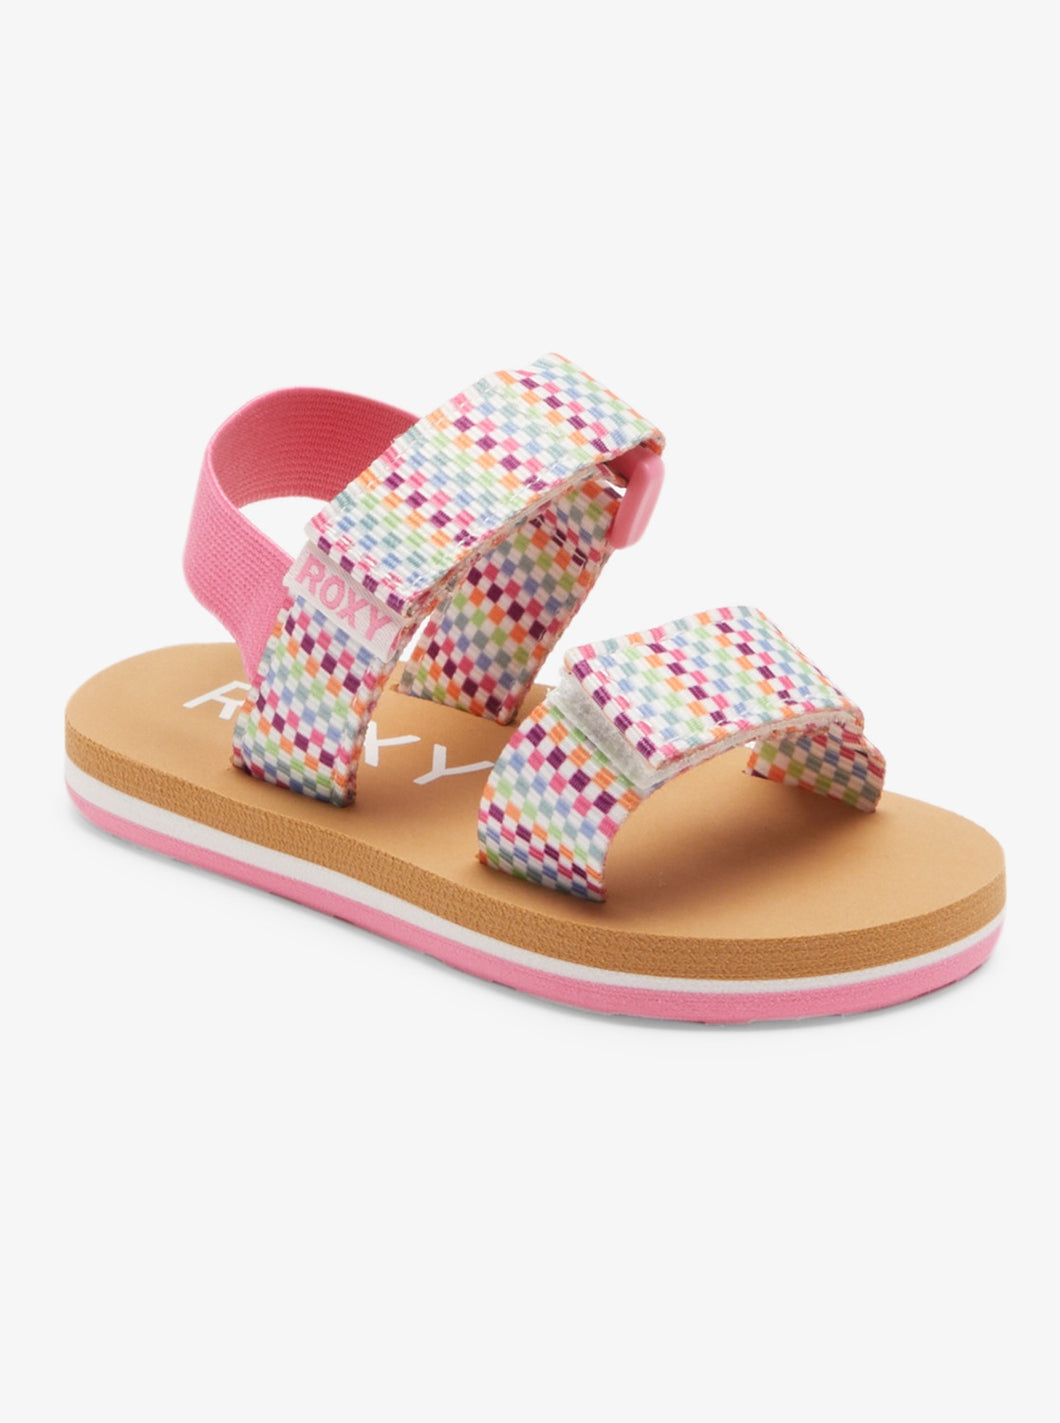 Toddler Roxy Cage Sandle